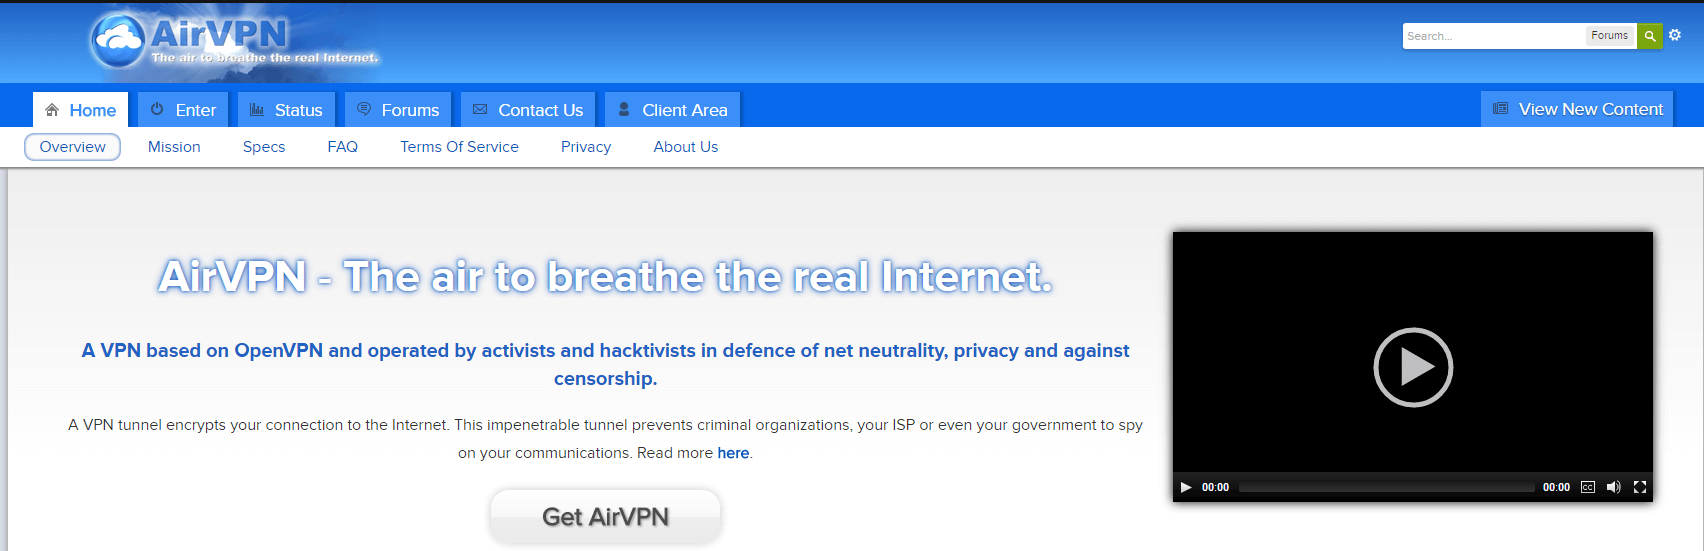 How To Set Up AirVPN On Edge Router 4?